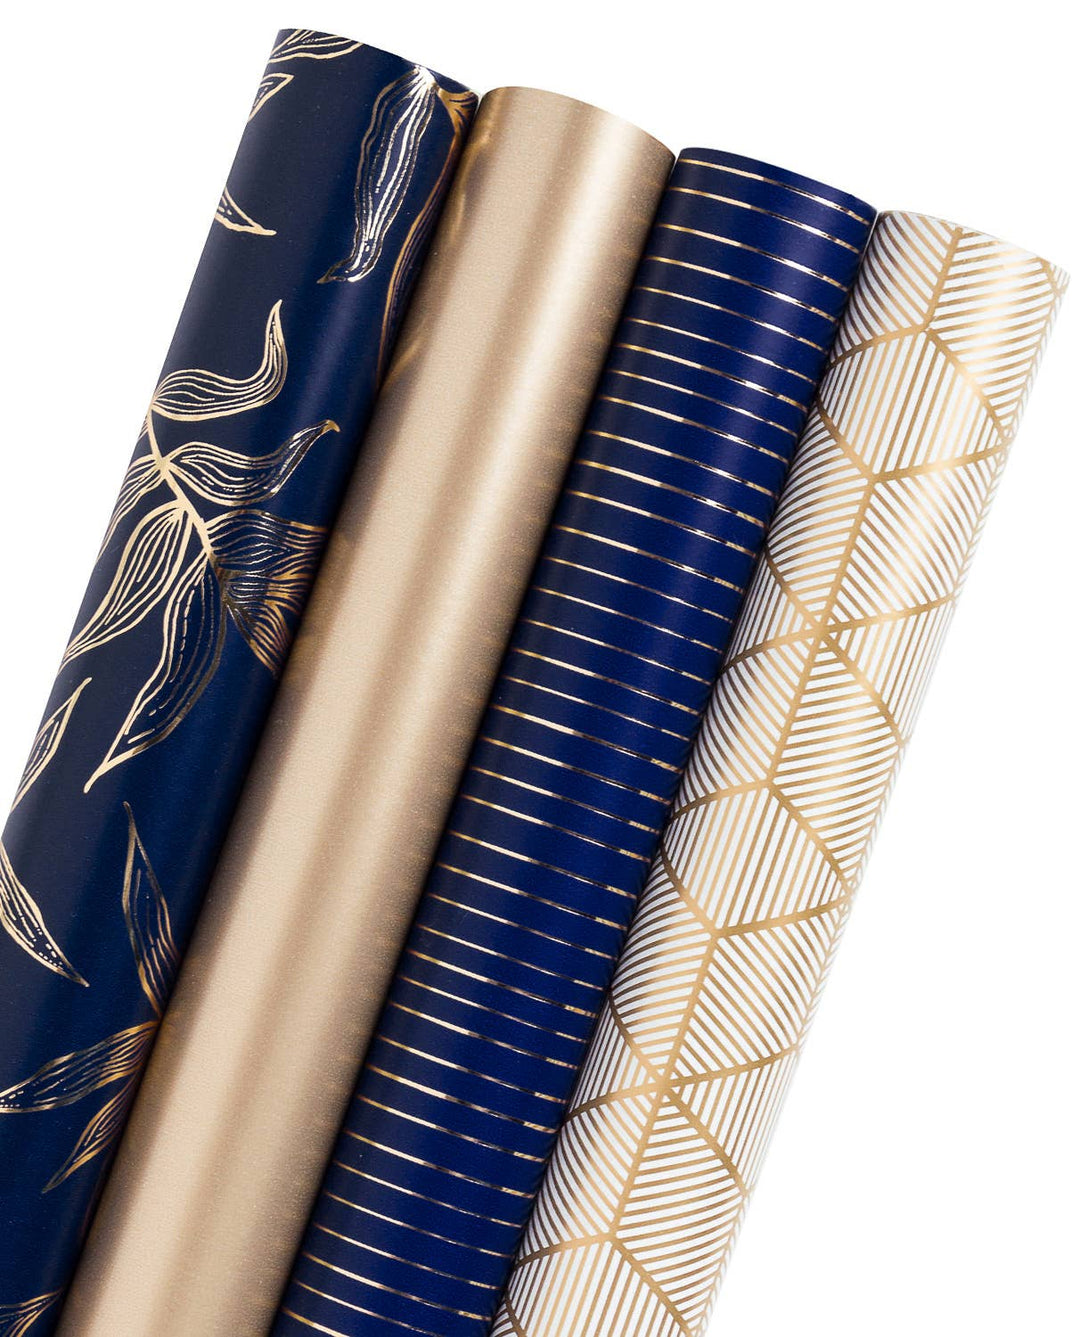 Botanical Leaf Navy & Gold Wrapping Paper 4 Rolls